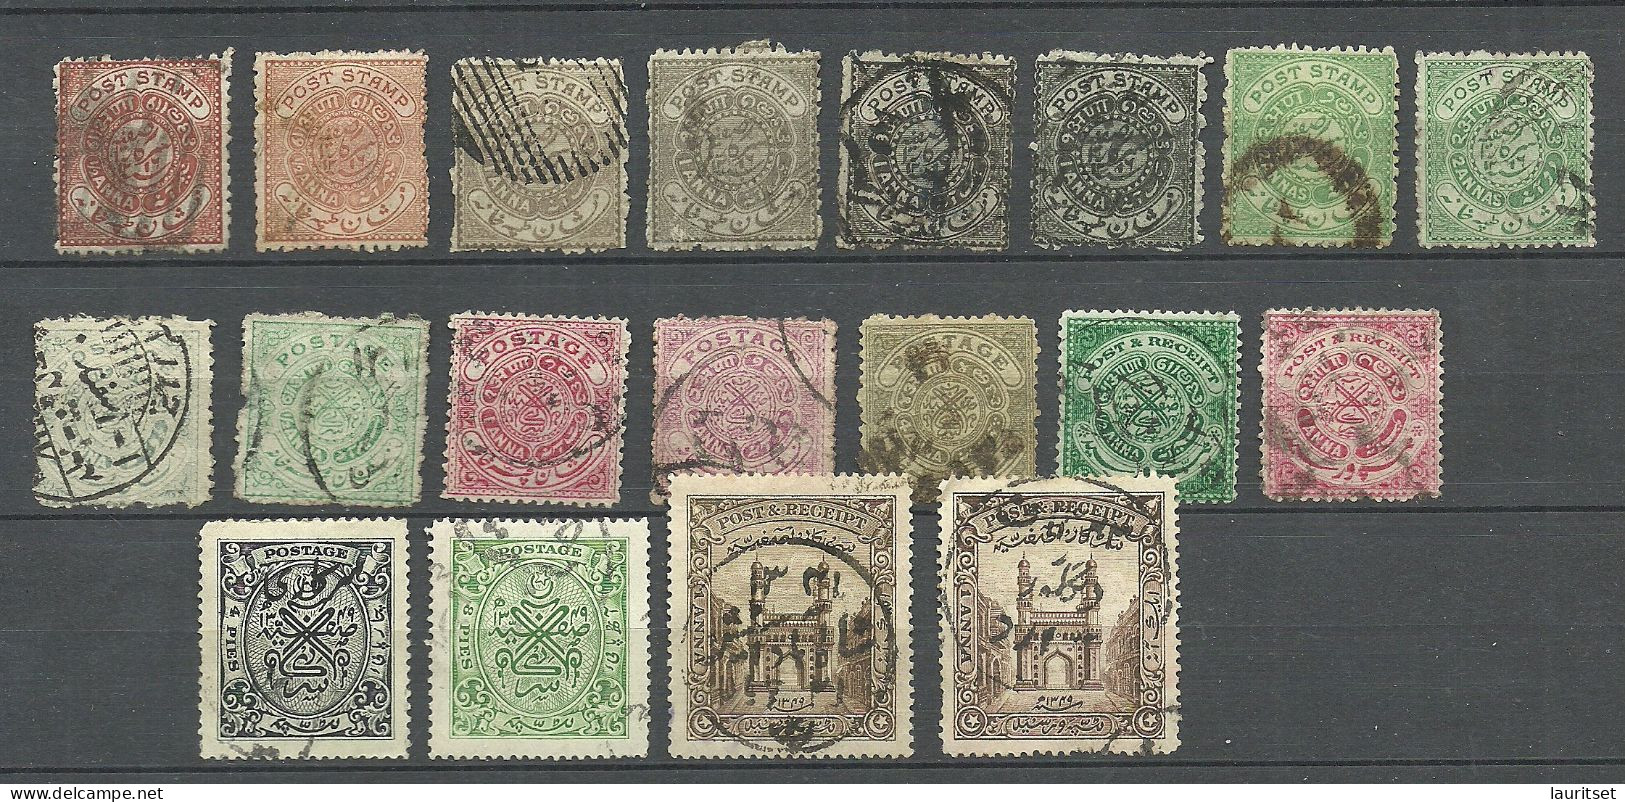 INDIA HAYDARABAD State 1871 - 1931, 19 Stamps, O - Hyderabad